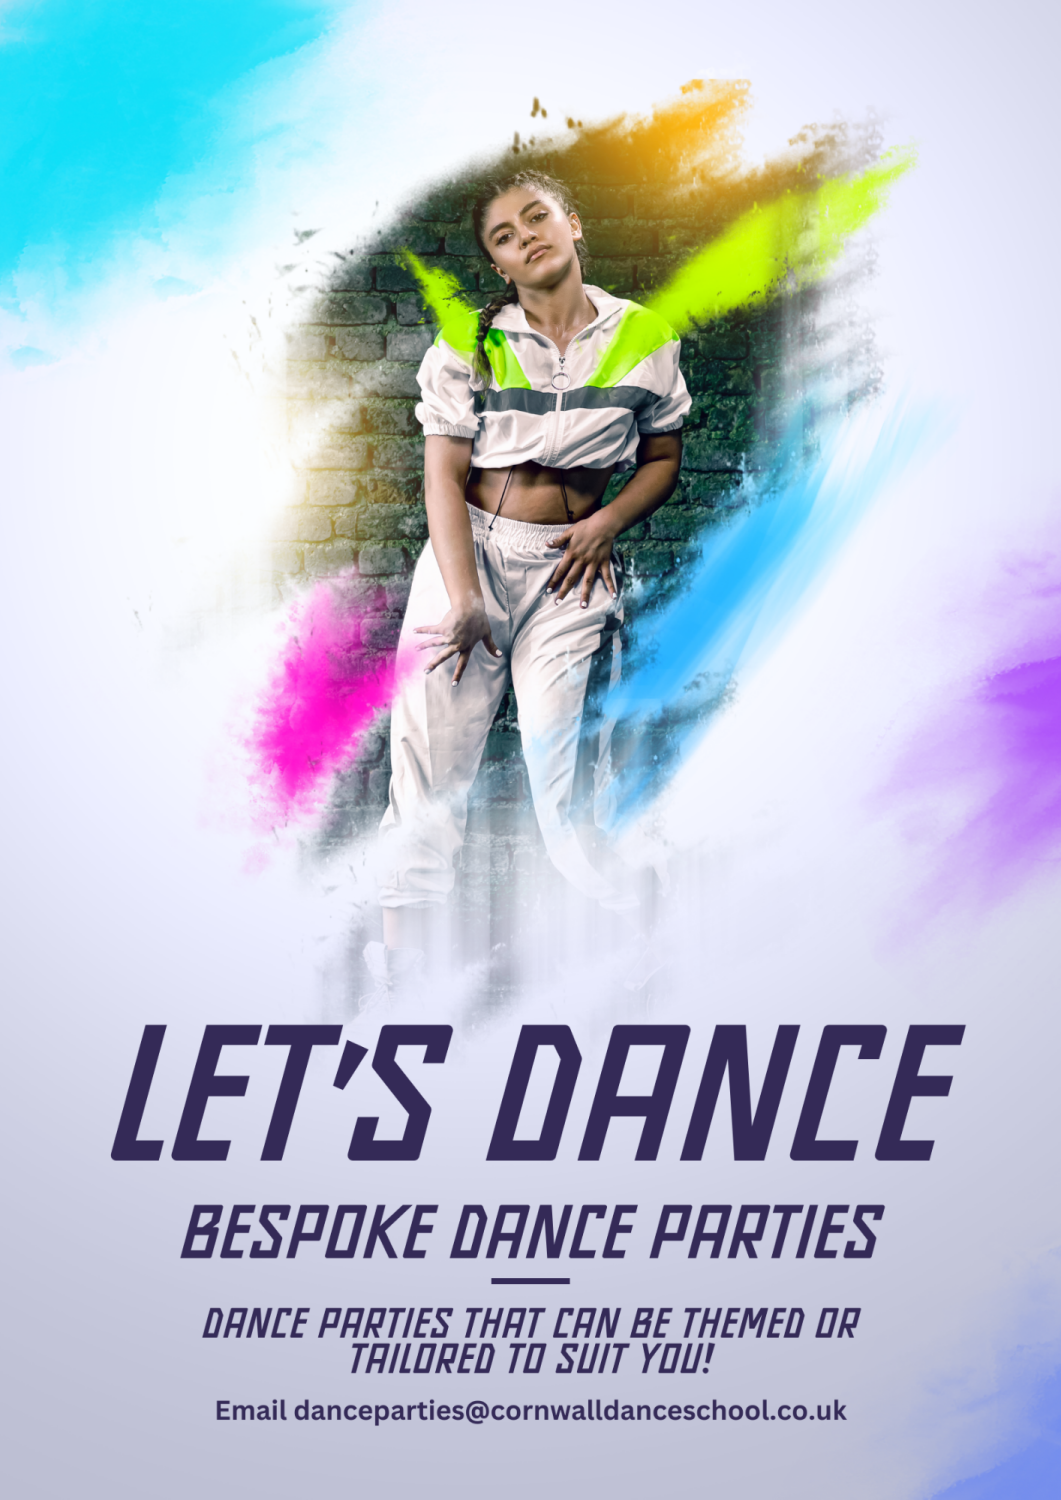 Dance Party - 10 Person Party at £120 (Minimum Number Required) for 1.5 hou